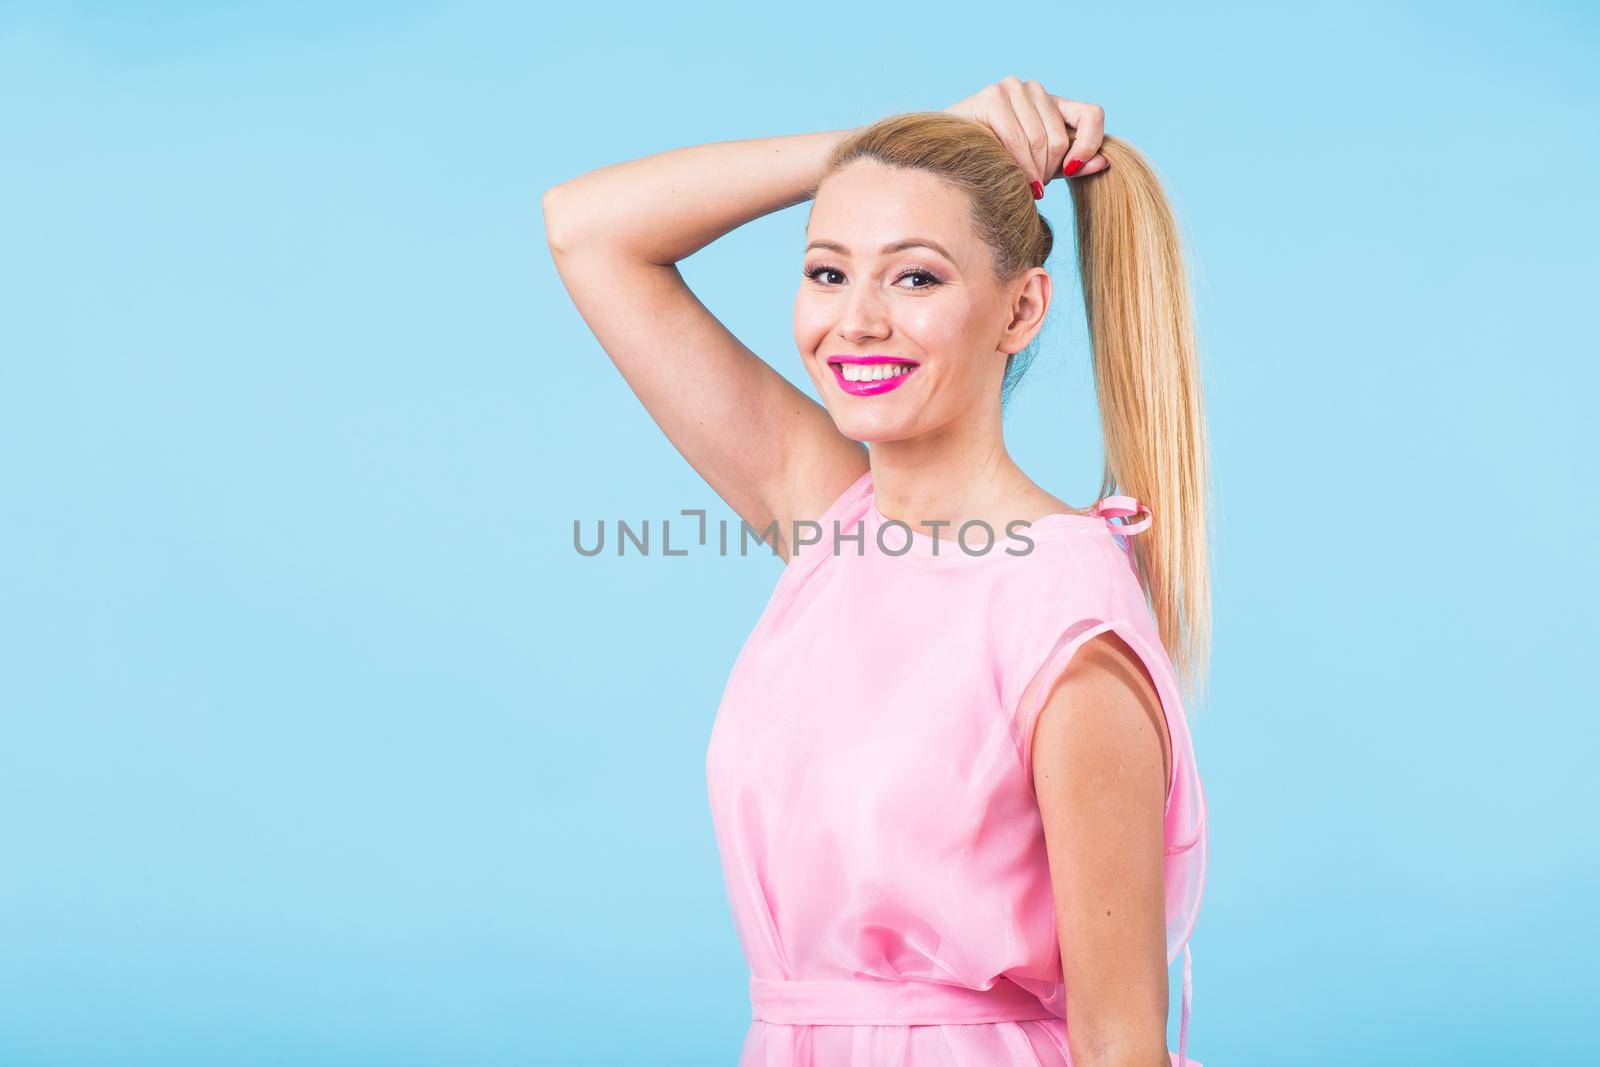 Portrait of happy cheerful smiling young beautiful blond woman on blue background.